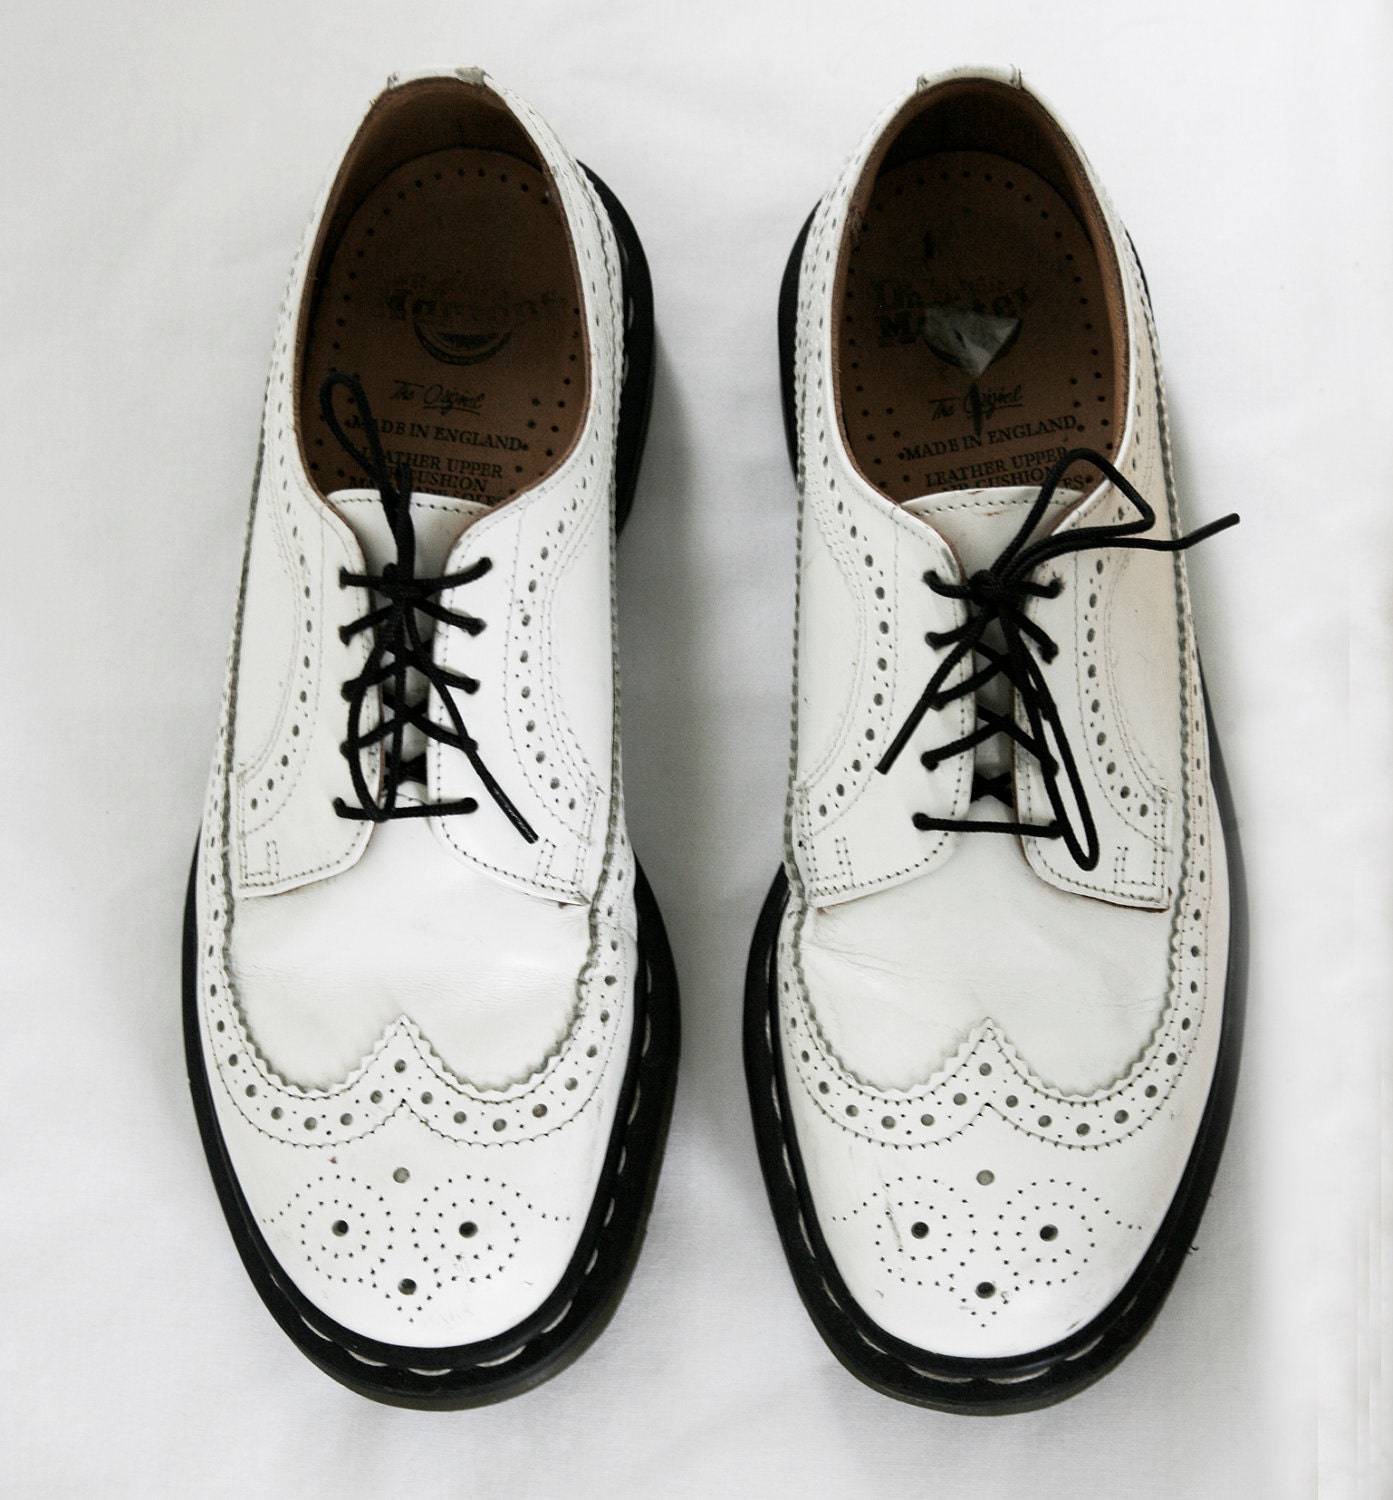 Rare Dr. Martens White Wing Tip Brogues UK 7 us by VintageReBelle